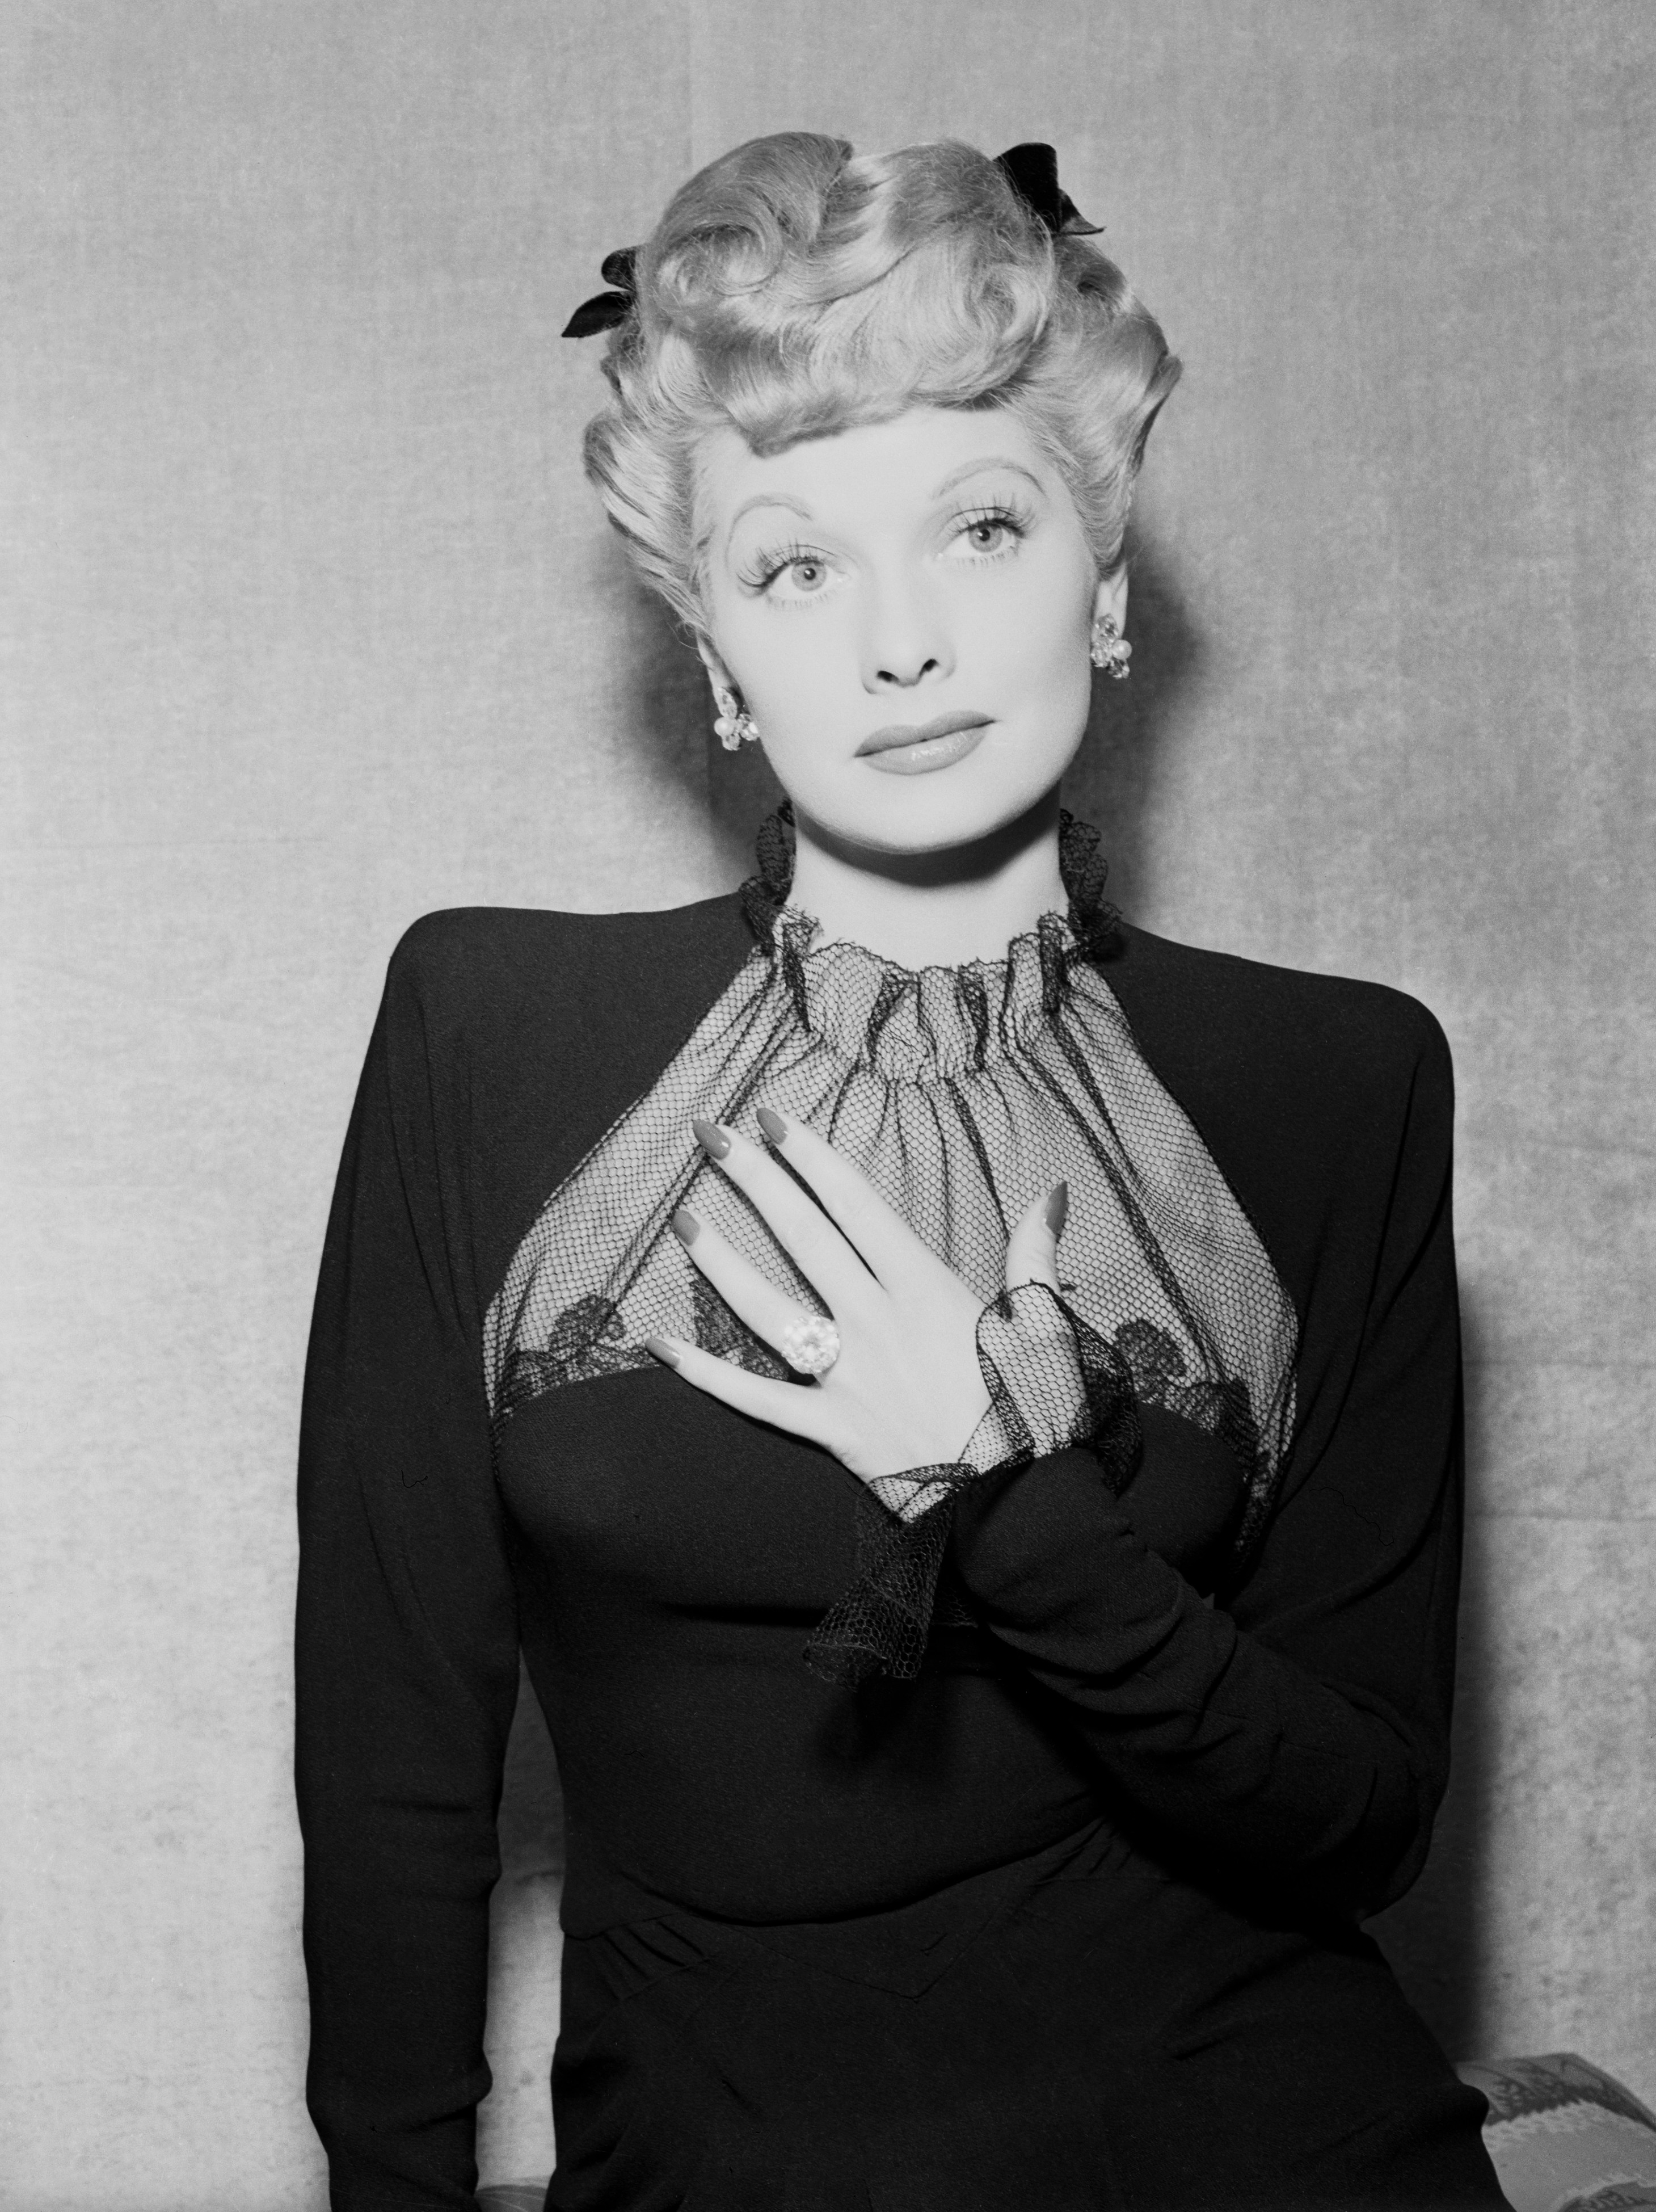 08 Oct 1943 --- Original caption: Lucille Ball, who was currently starring in MGM's Meet The People," was married to Desi Arnaz, who was later in the Army. With marriages then expected to reach an all time high of 2,000,000 in 1943, public interest in engagement and marriage rings was correspondingly high. Lucille Ball is shown wearing the ring chosen by herself as a Hollywood bride to be. --- Image by © Bettmann/CORBIS